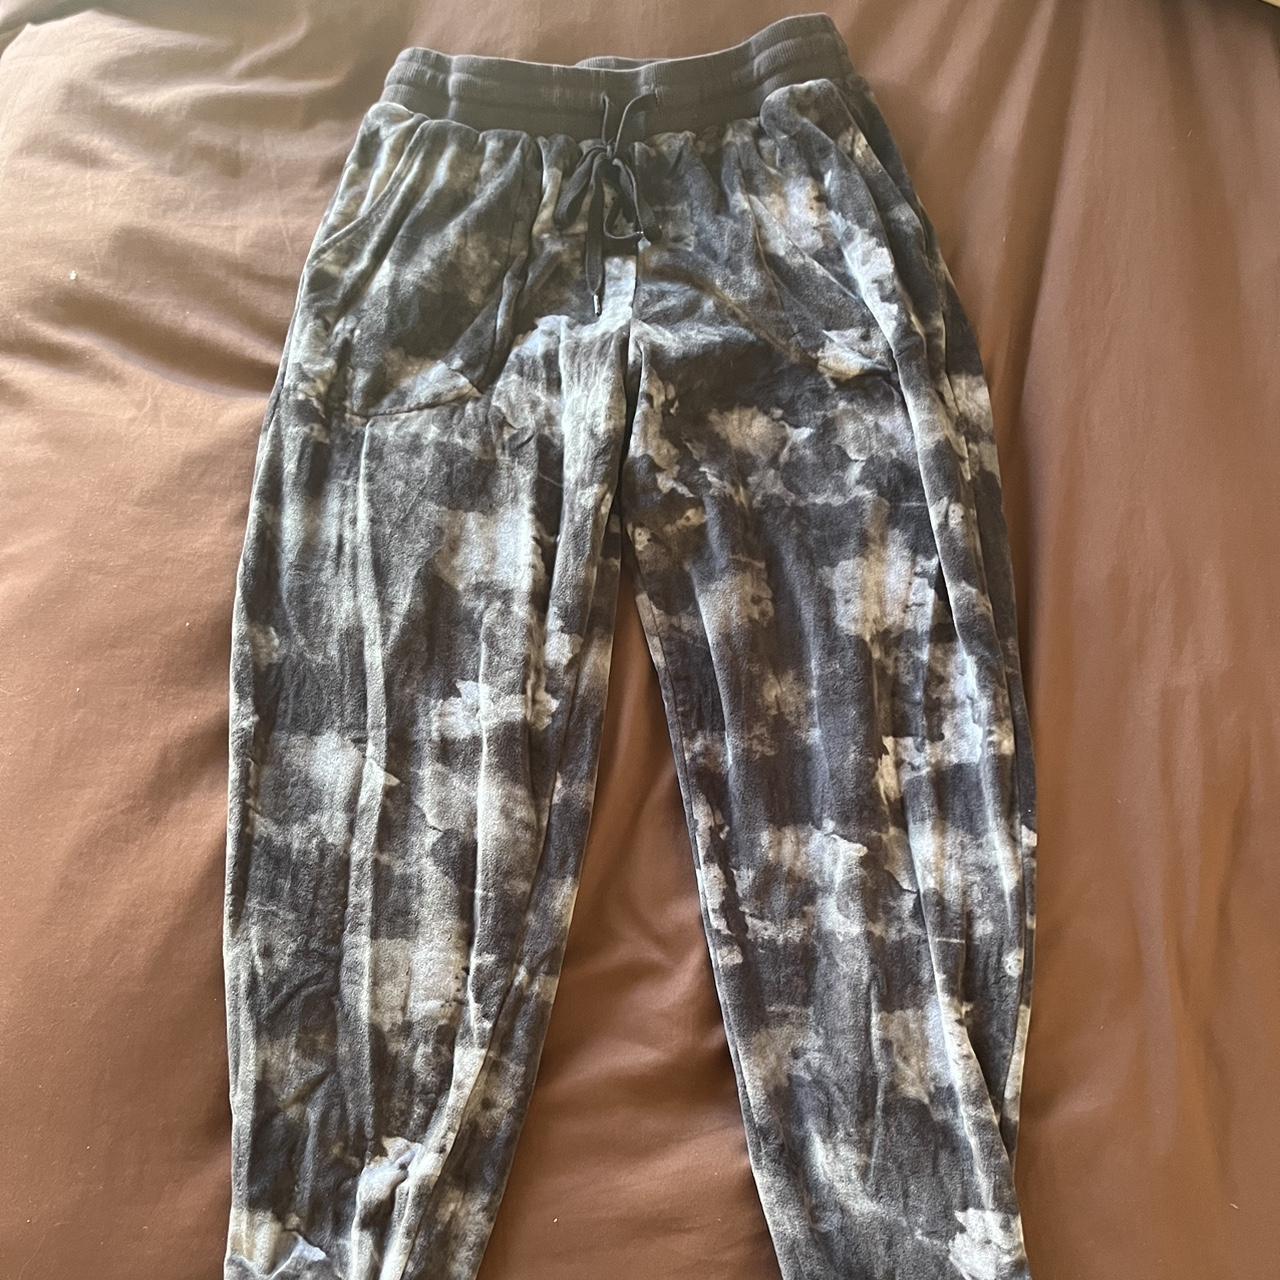 costco pajama pants. extremely soft. worn but in... - Depop